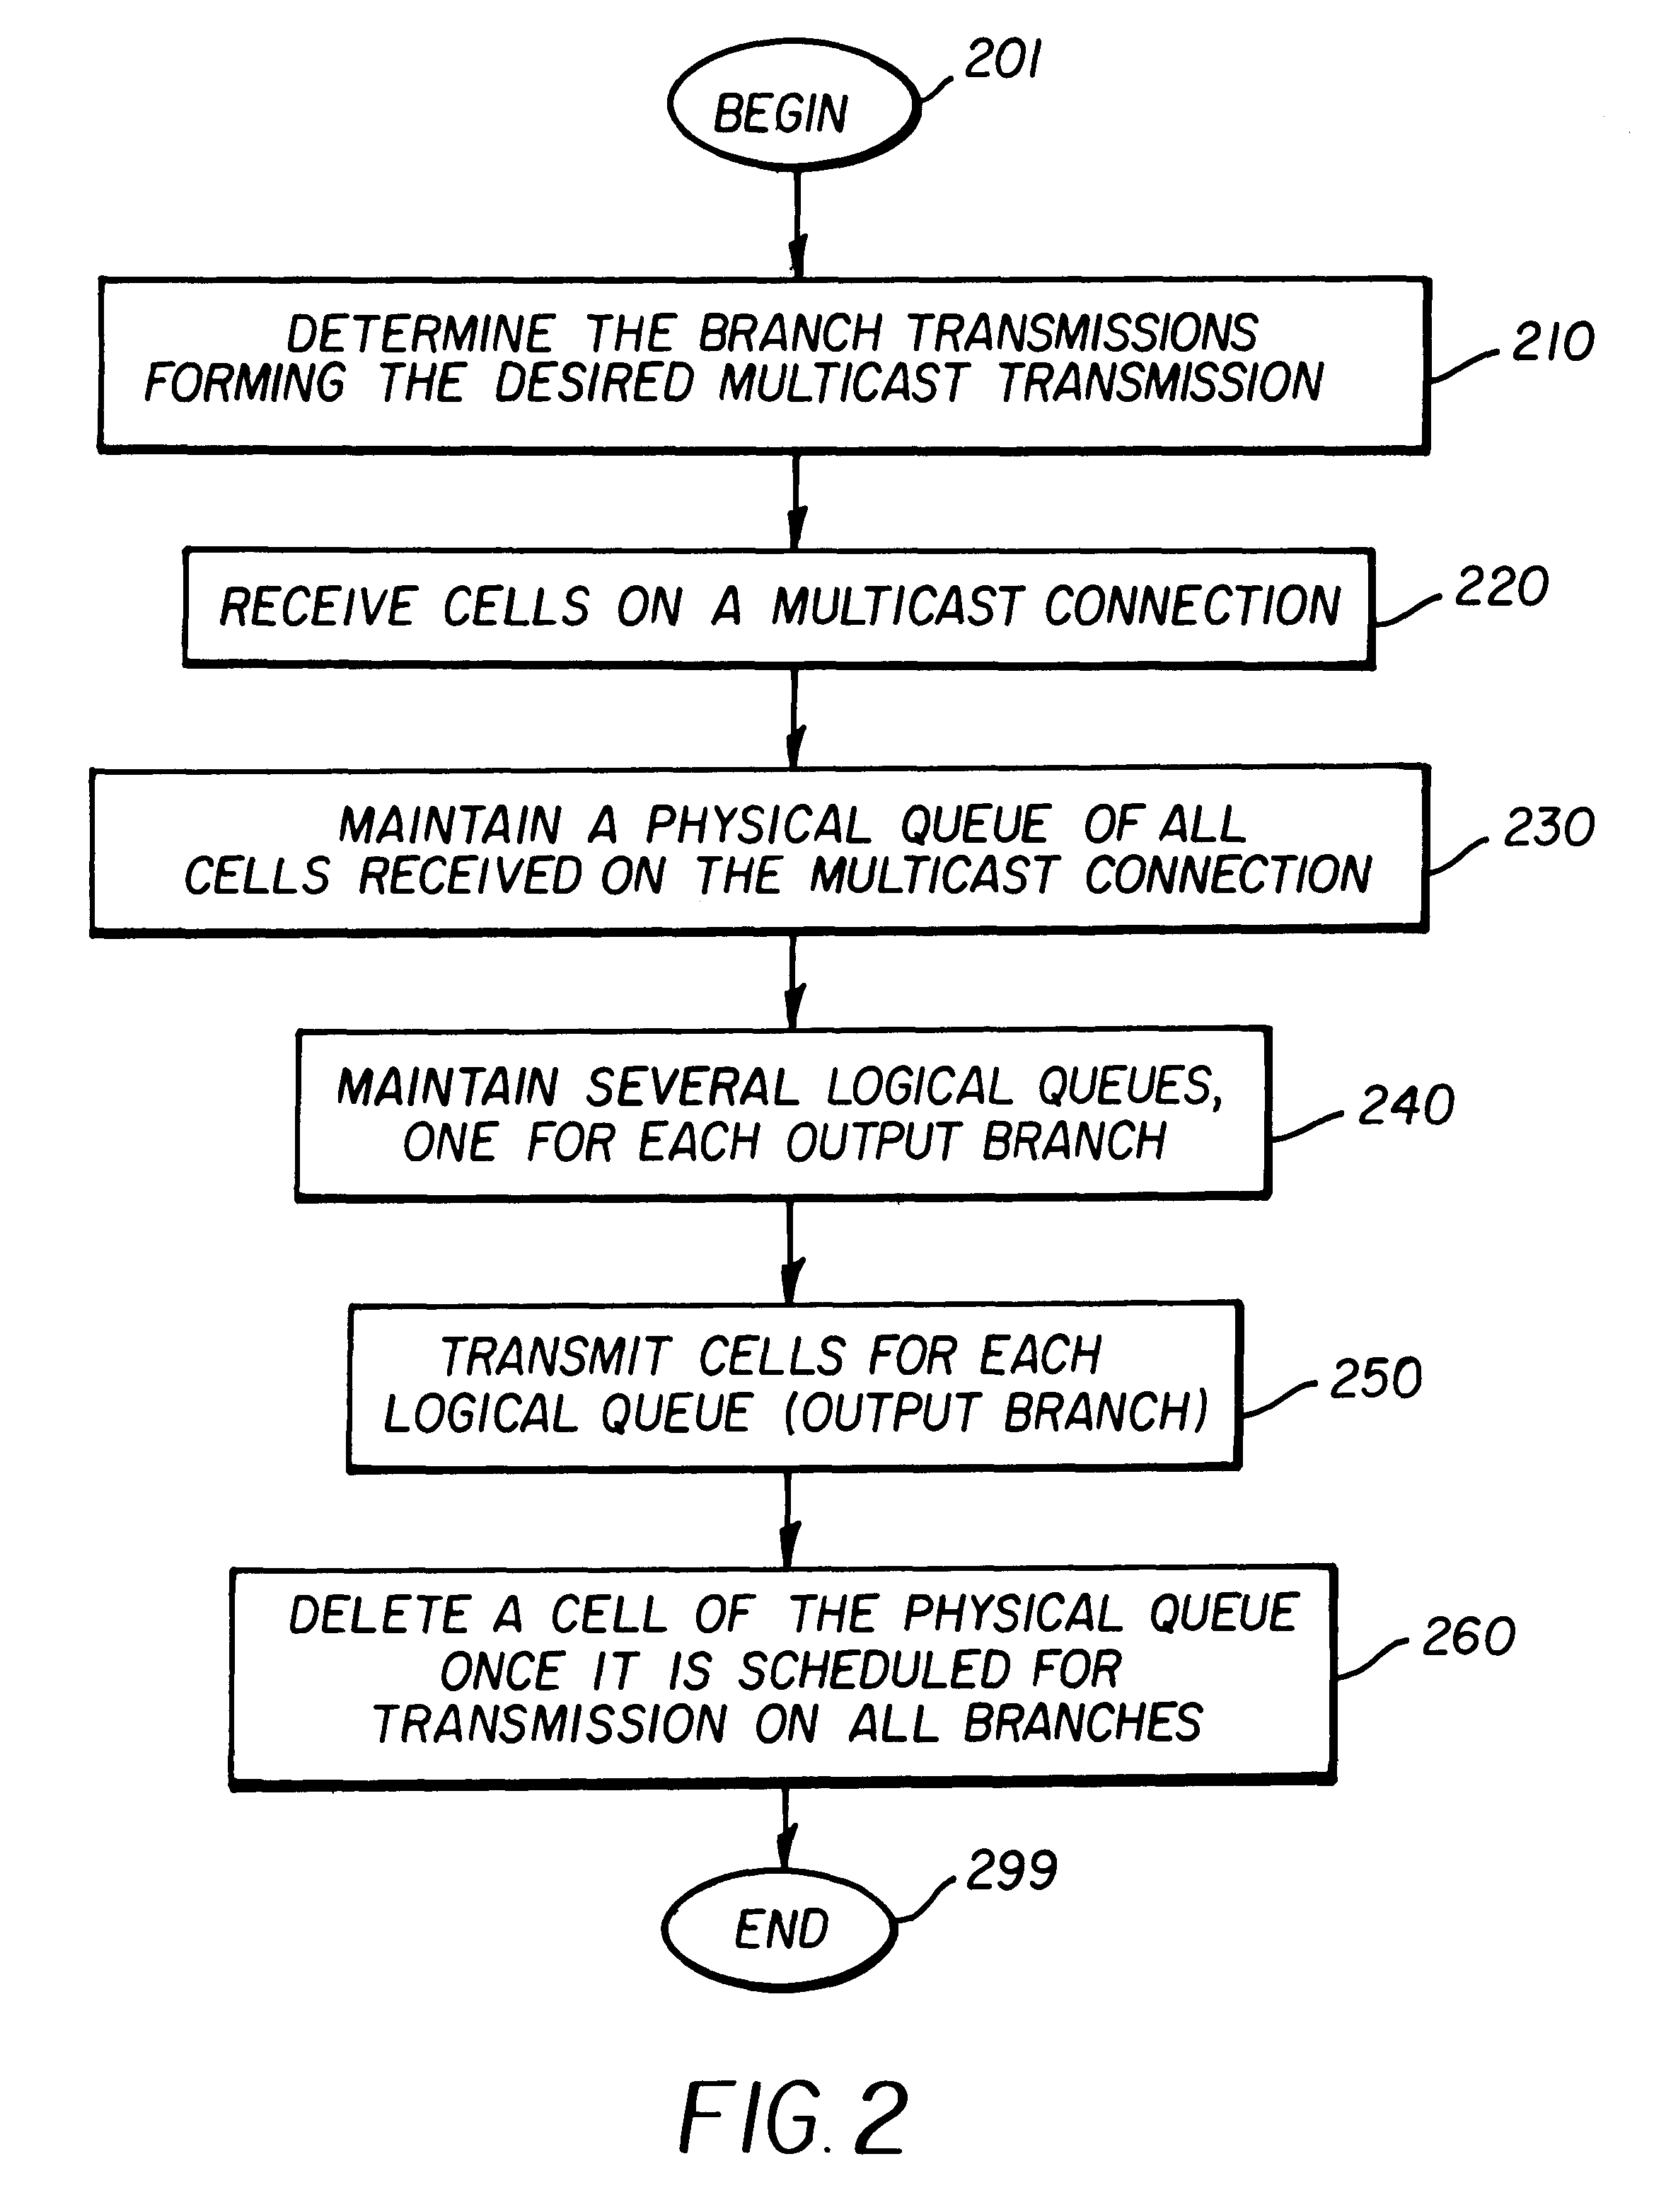 Queue management with support for multicasts in an asynchronous transfer mode (ATM) switch